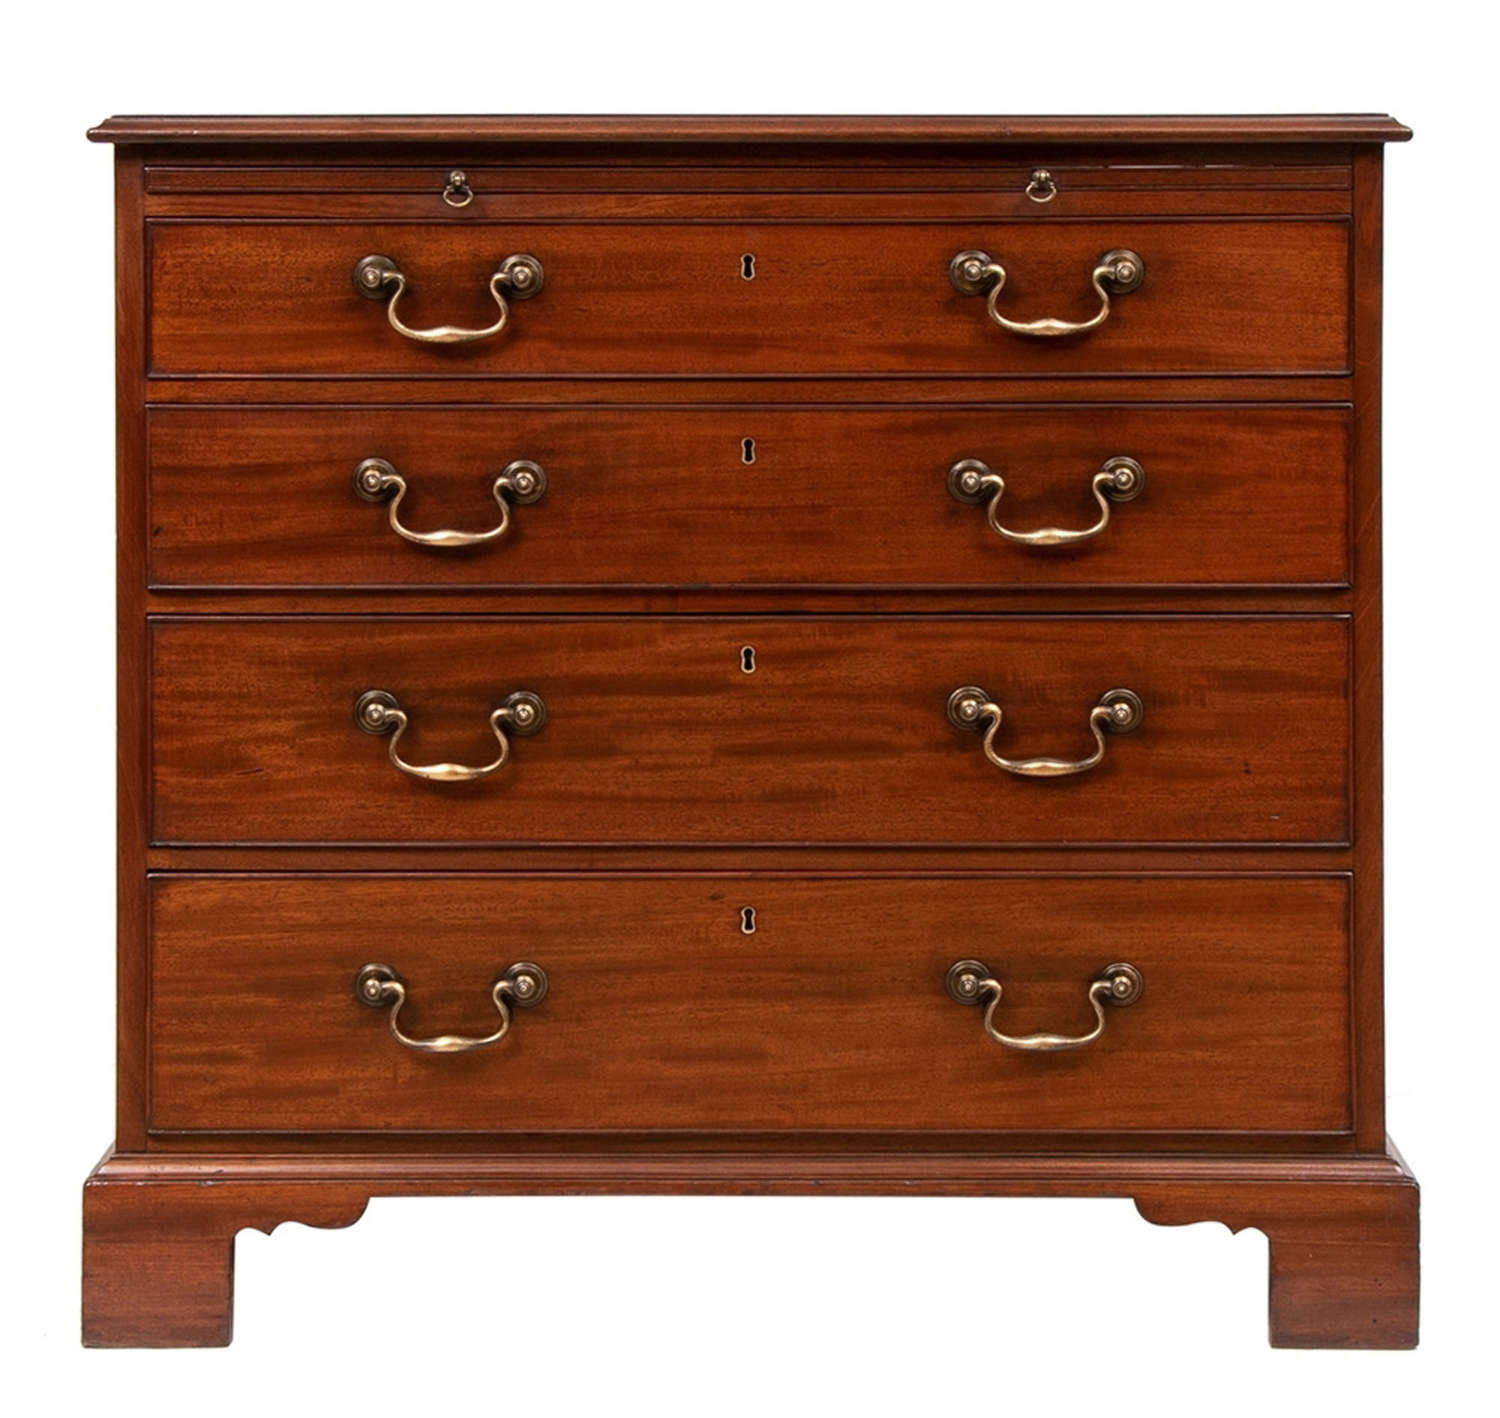 Antique Mahogany Bachelors Chest of Drawers c.1790